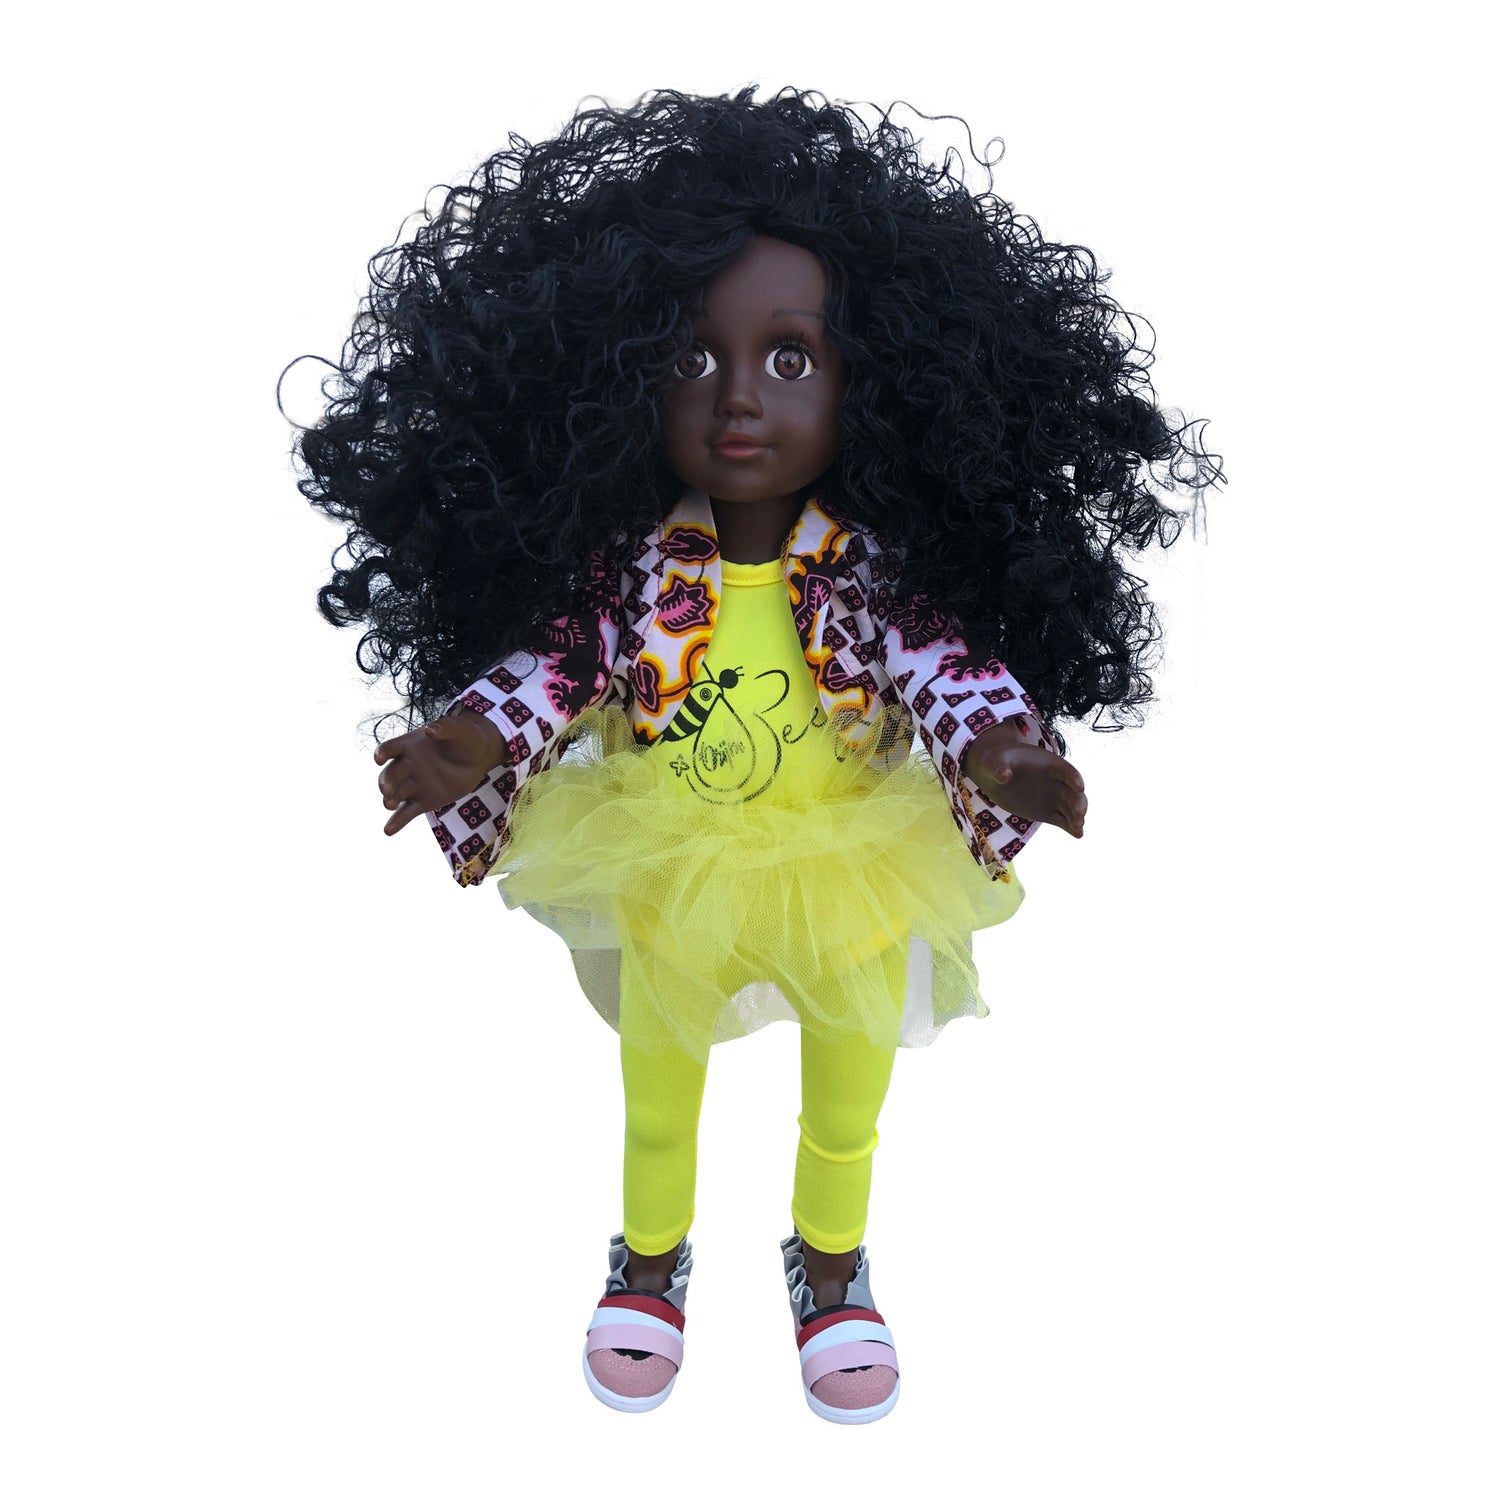 Curl Girlfriend Trudy -  African American Black Latino Hispanic Biracial Multicultural Curly Natural Hair 18 inch Fashion Doll | Orijin Bees